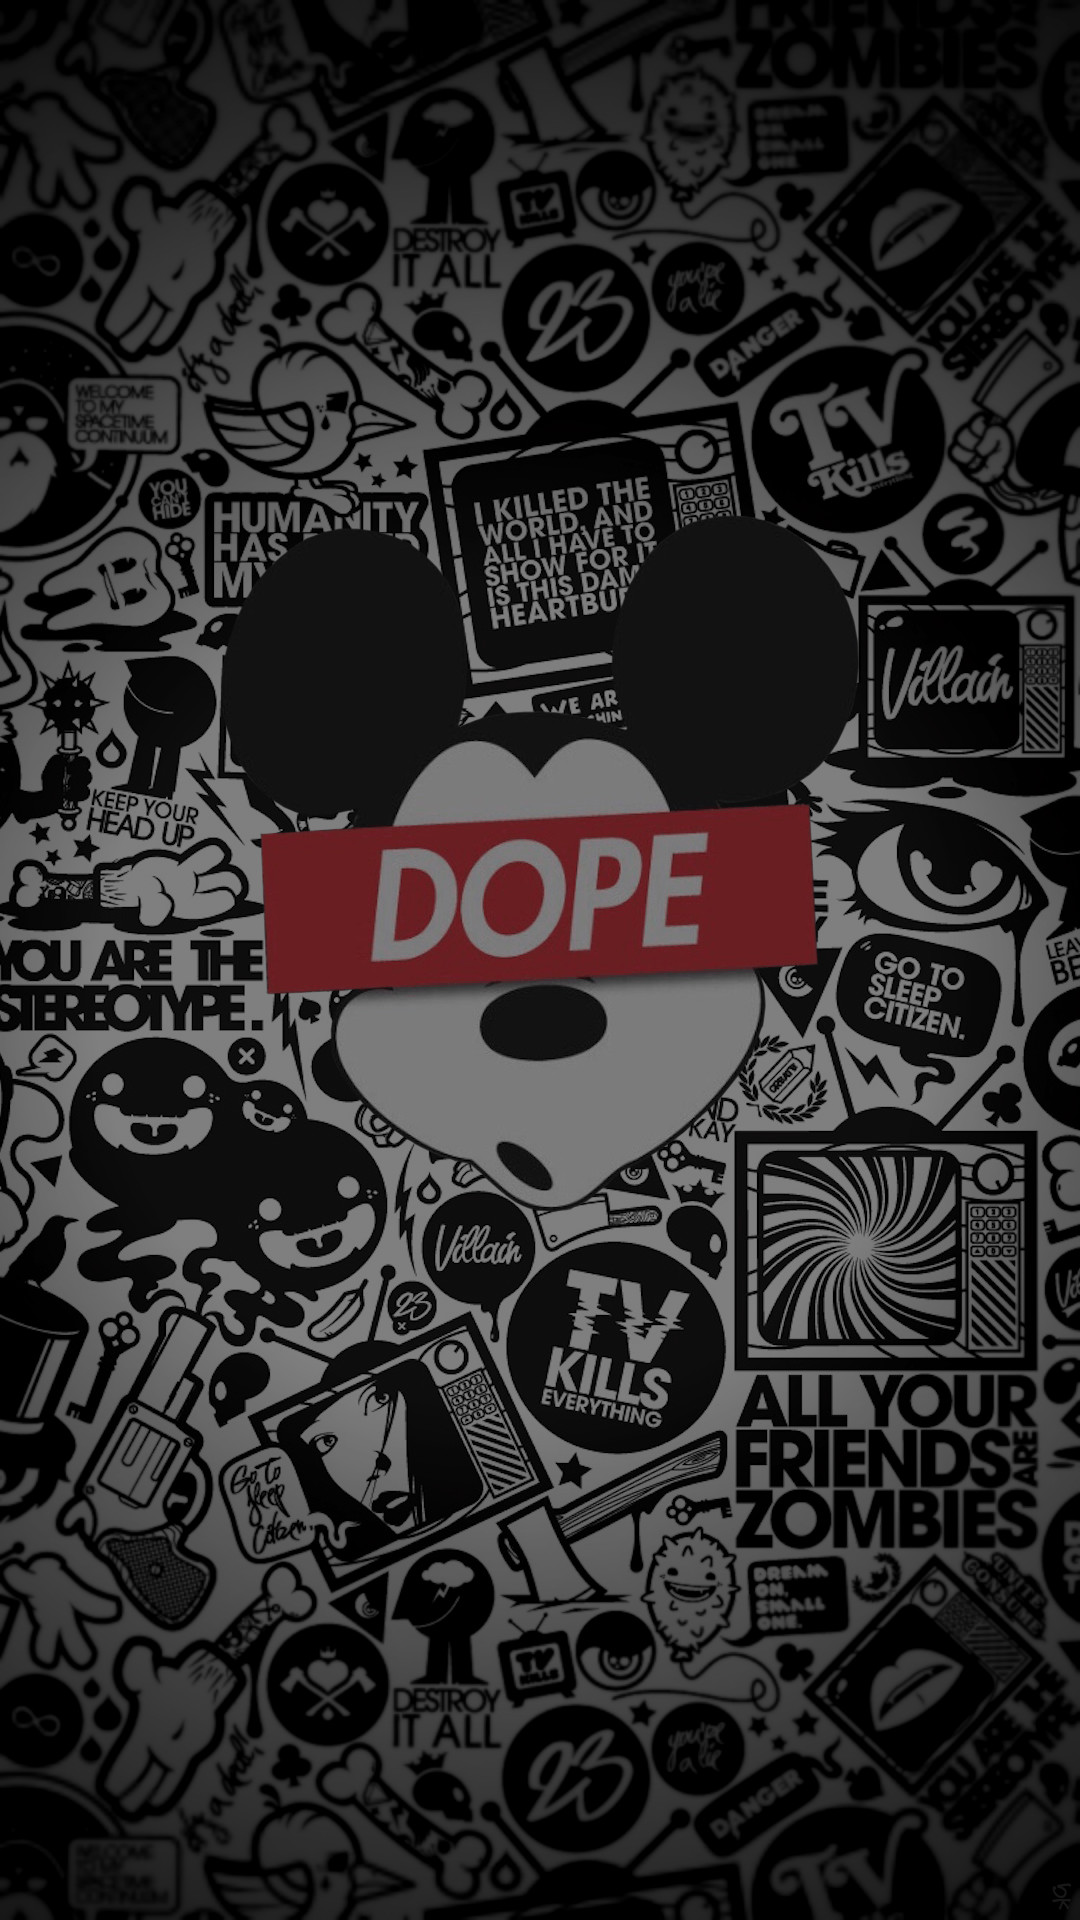 1080x1920  Mickey Dope - Tap to see more Dope wallpaper! - @mobile9 | iPhone